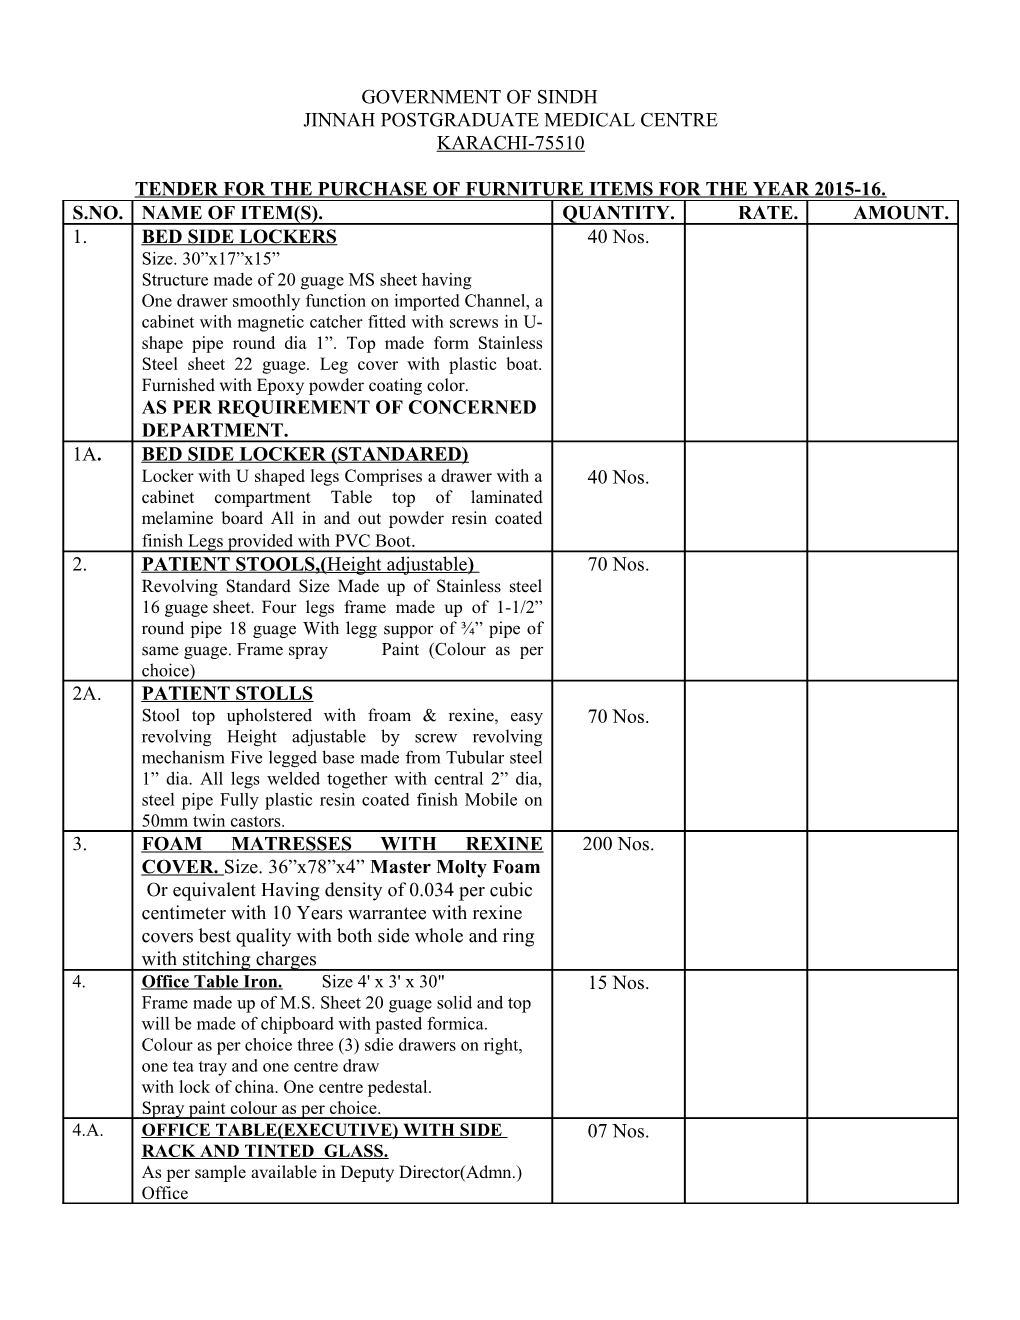 Tender for the Purchase of Furniture Items for the Year 2015-16